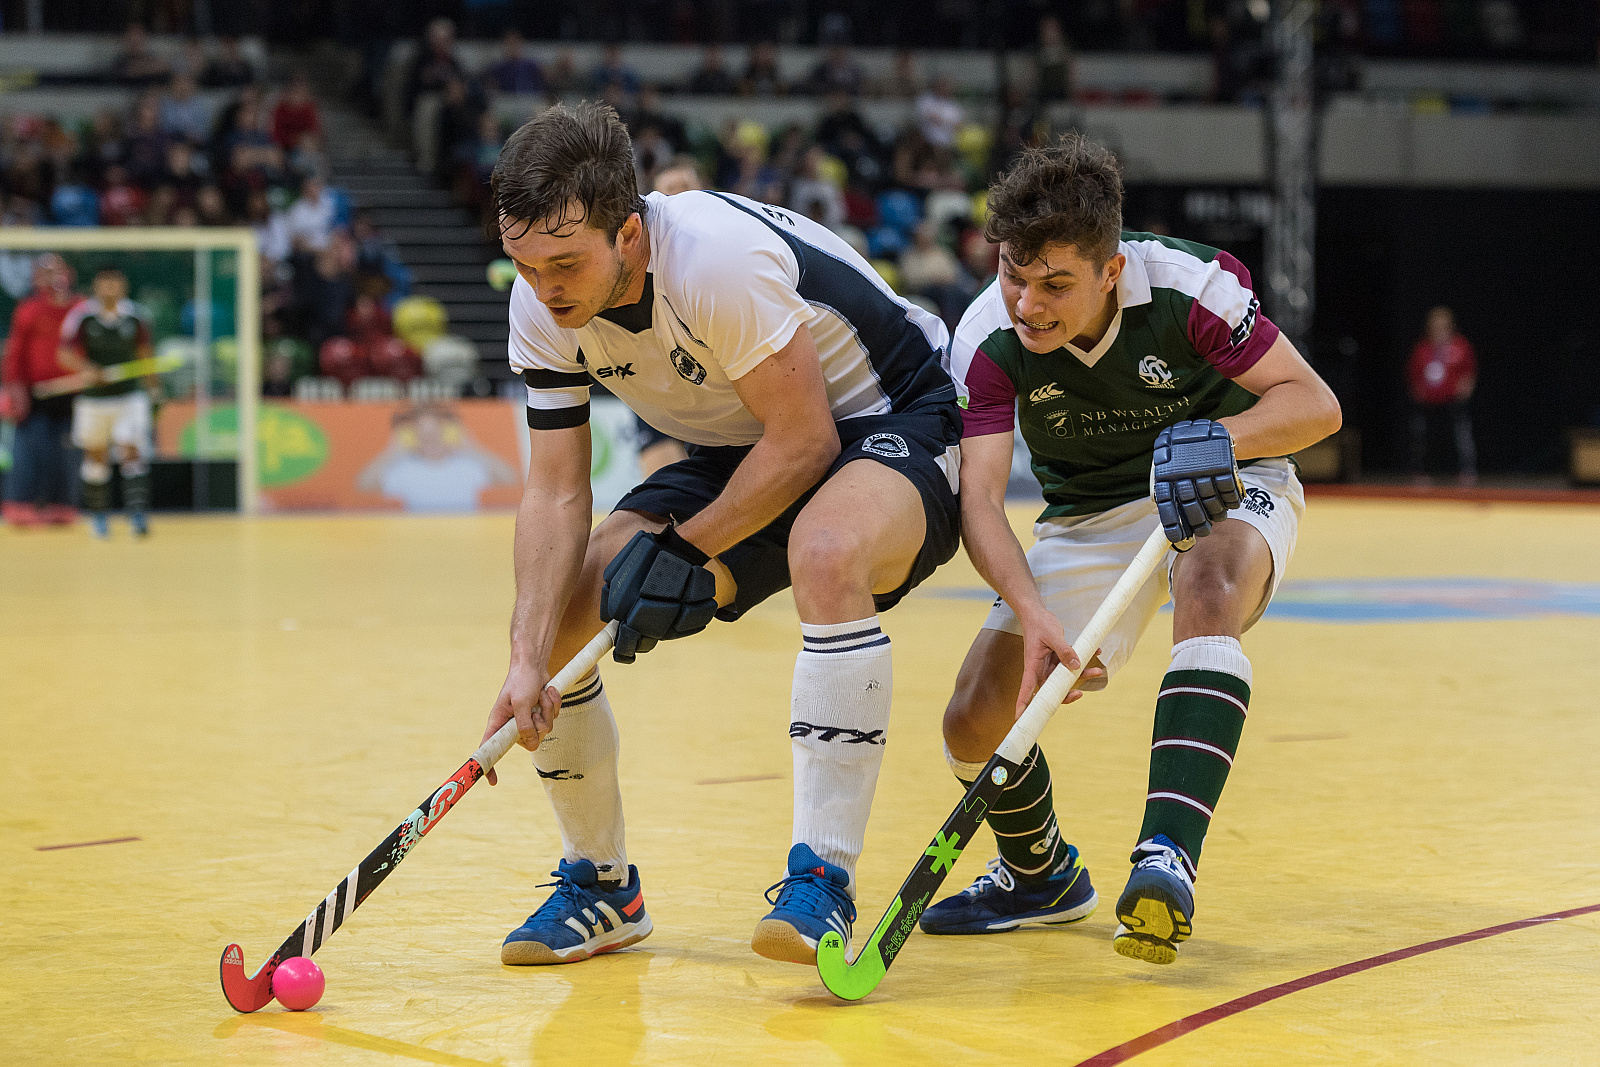 East Grinstead's Simon Faulkner is watched by Johnny Gall of Surbiton. East Grinstead v Surbiton - Jaffa Super6s Semi Final, Copper Box Arena, London, UK on 28 January 2018. Photo: Simon Parker - 2018 01 28 Indoor Men Official Images